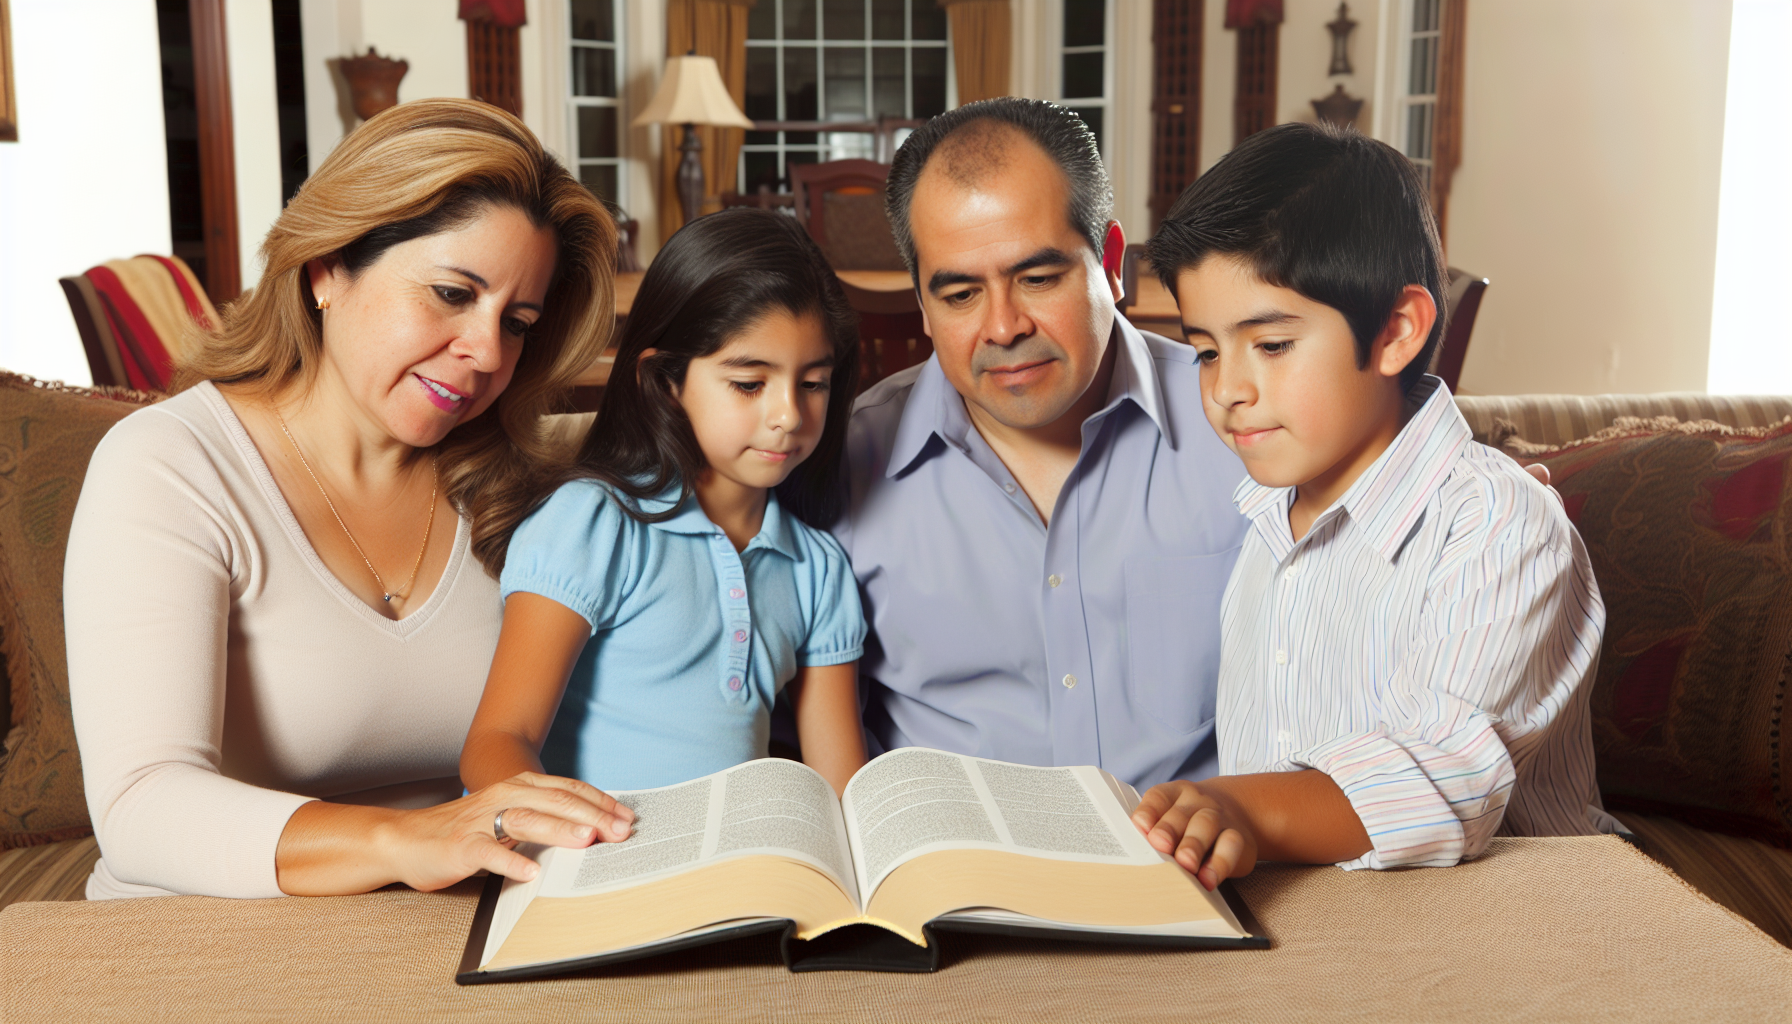 A Hispanic family looks at a book together. 